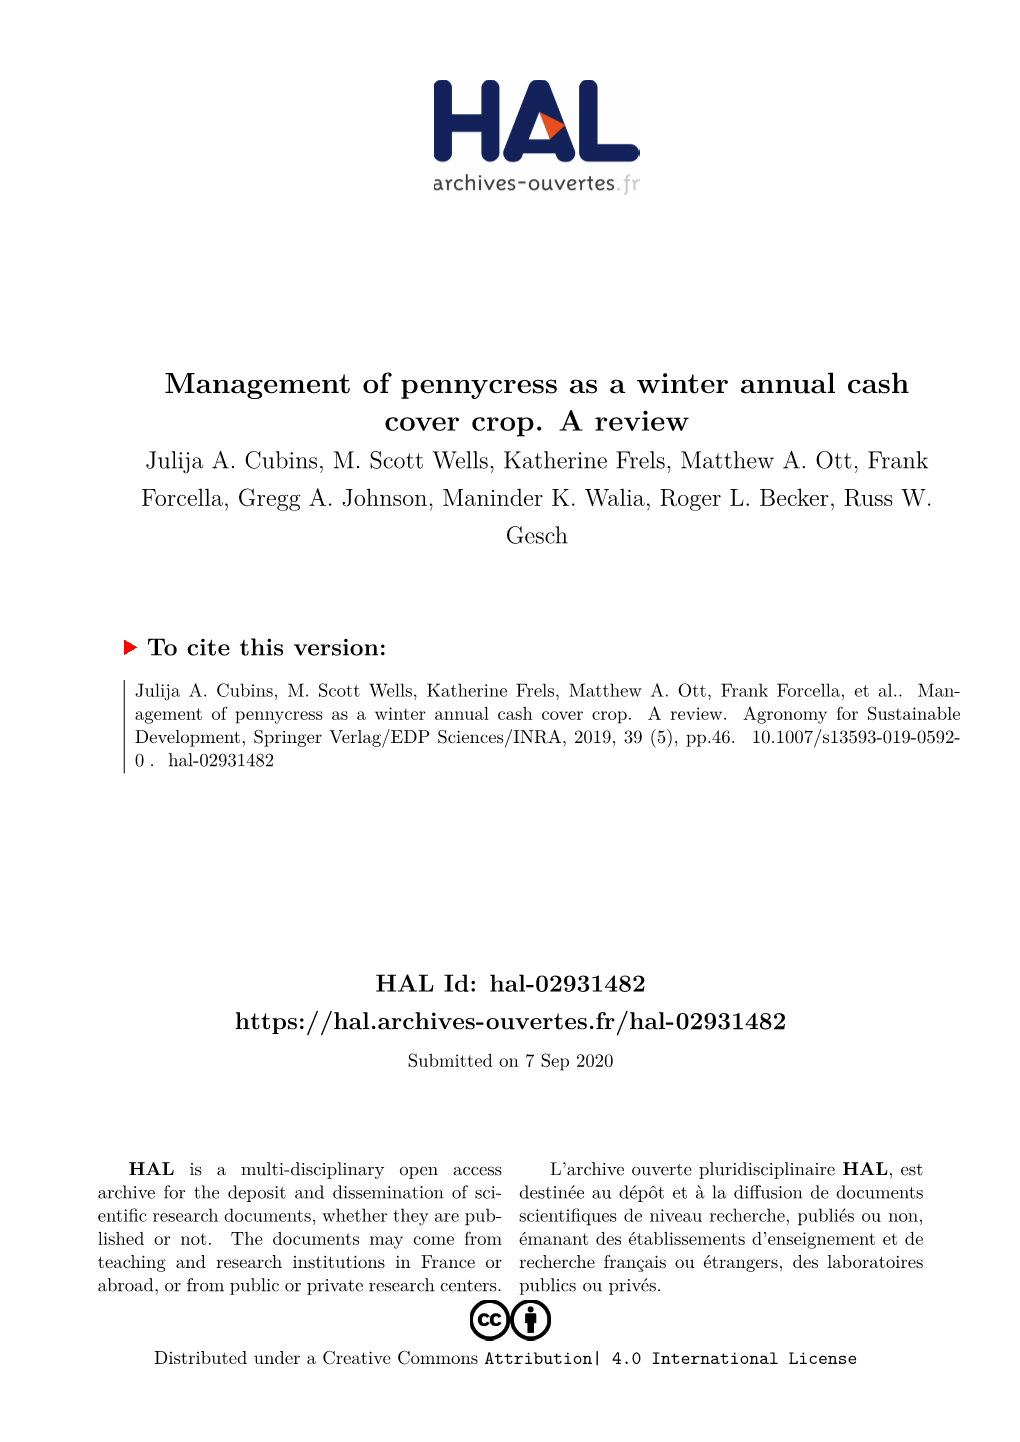 Management of Pennycress As a Winter Annual Cash Cover Crop. a Review Julija A